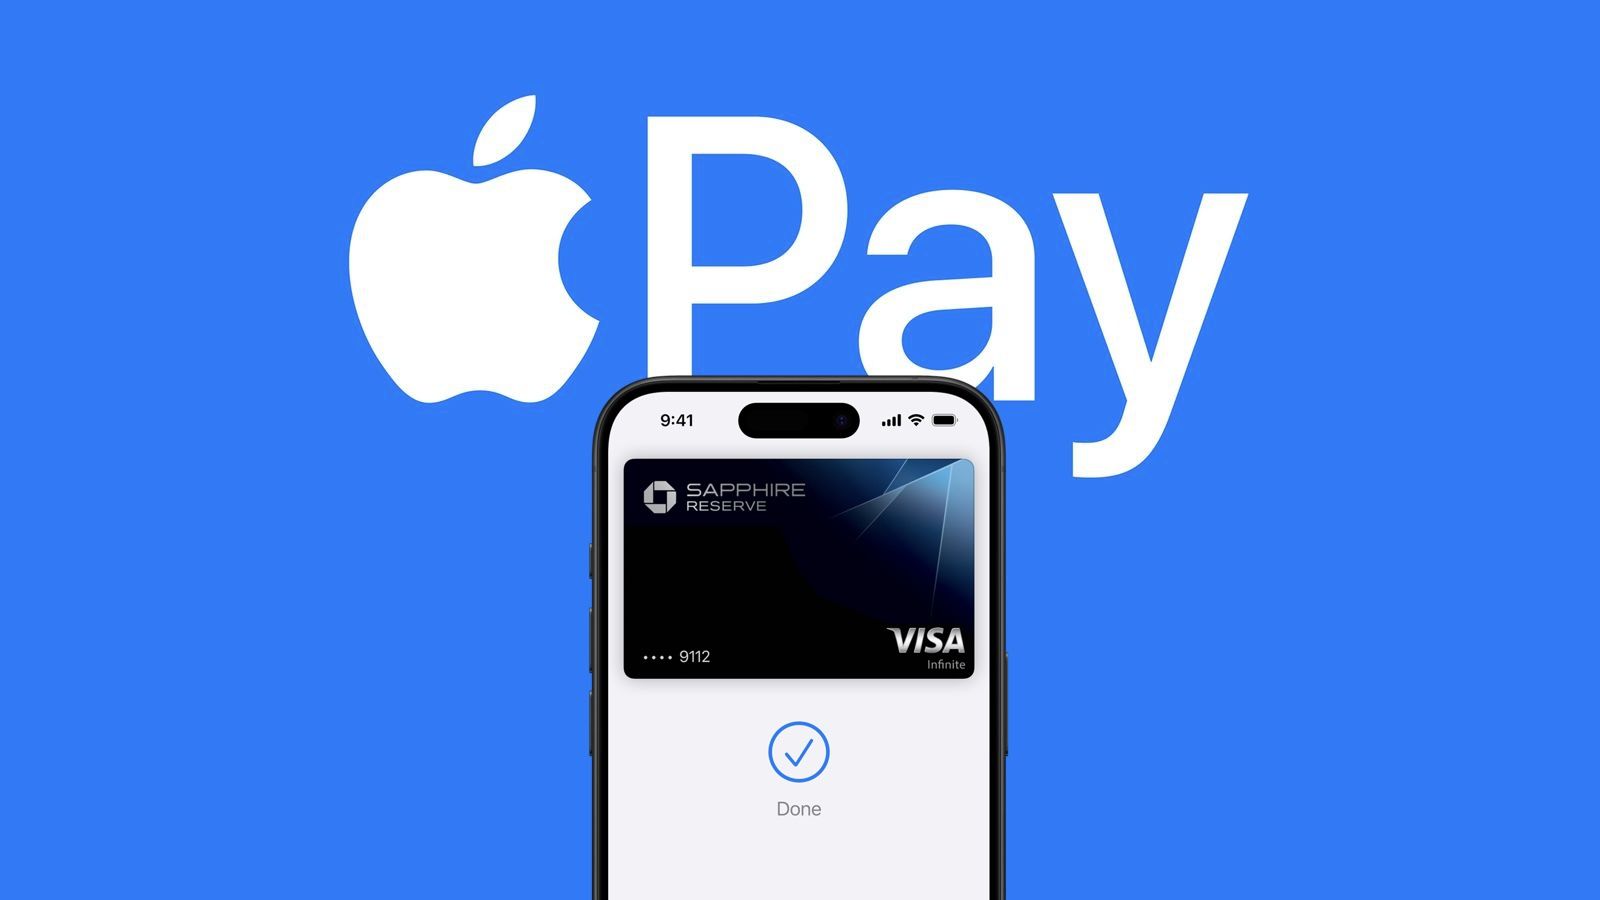 Apple Offers to Open NFC Payment Technology to Third-Party Developers in Europe